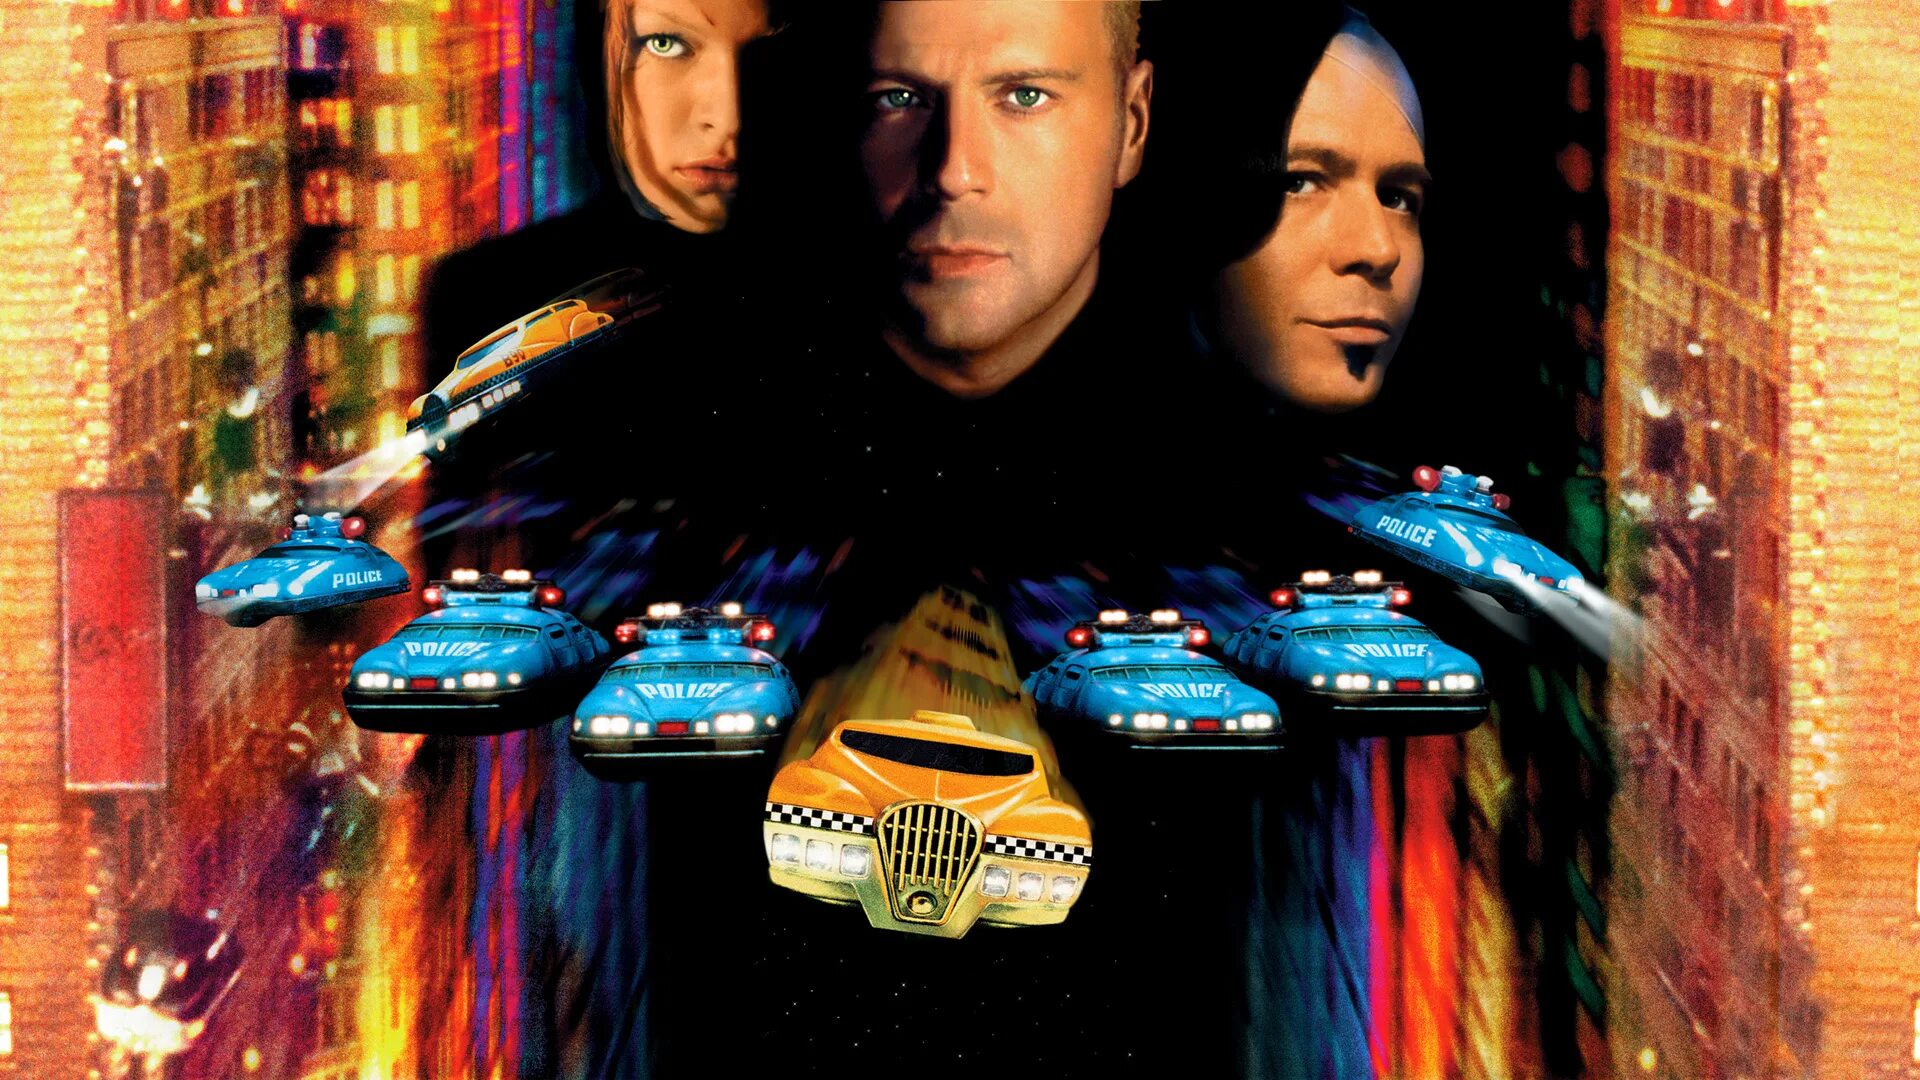 The Fifth element 1997. The Fifth element / пятый элемент. Милла Йовович 5 элемент.